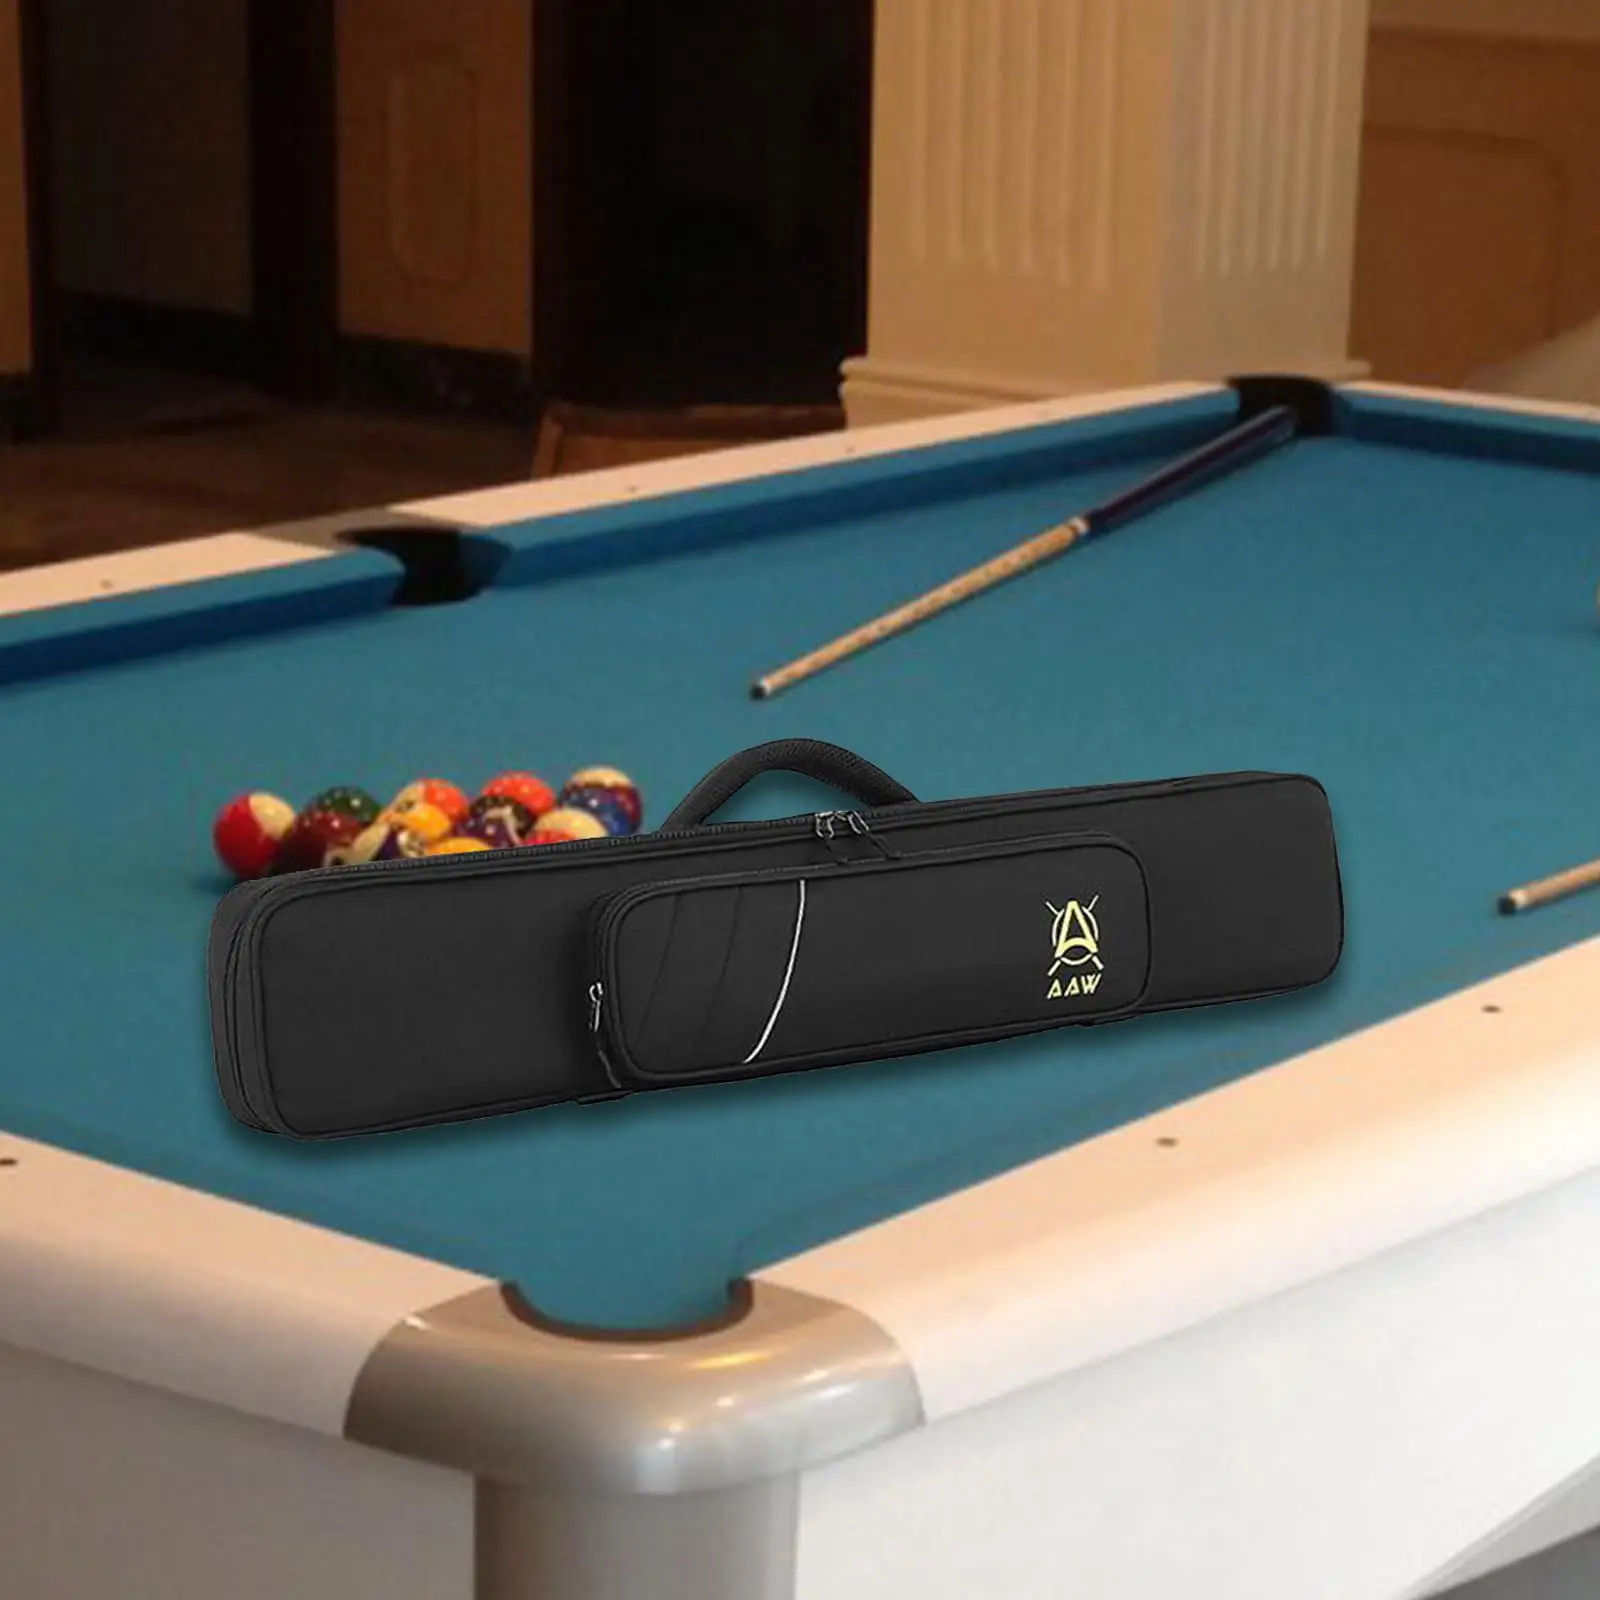 Billiards Pool Cue Cases 1/2 Club Bag Portable Hold 3 Butt 4 Shaft 32.68inch